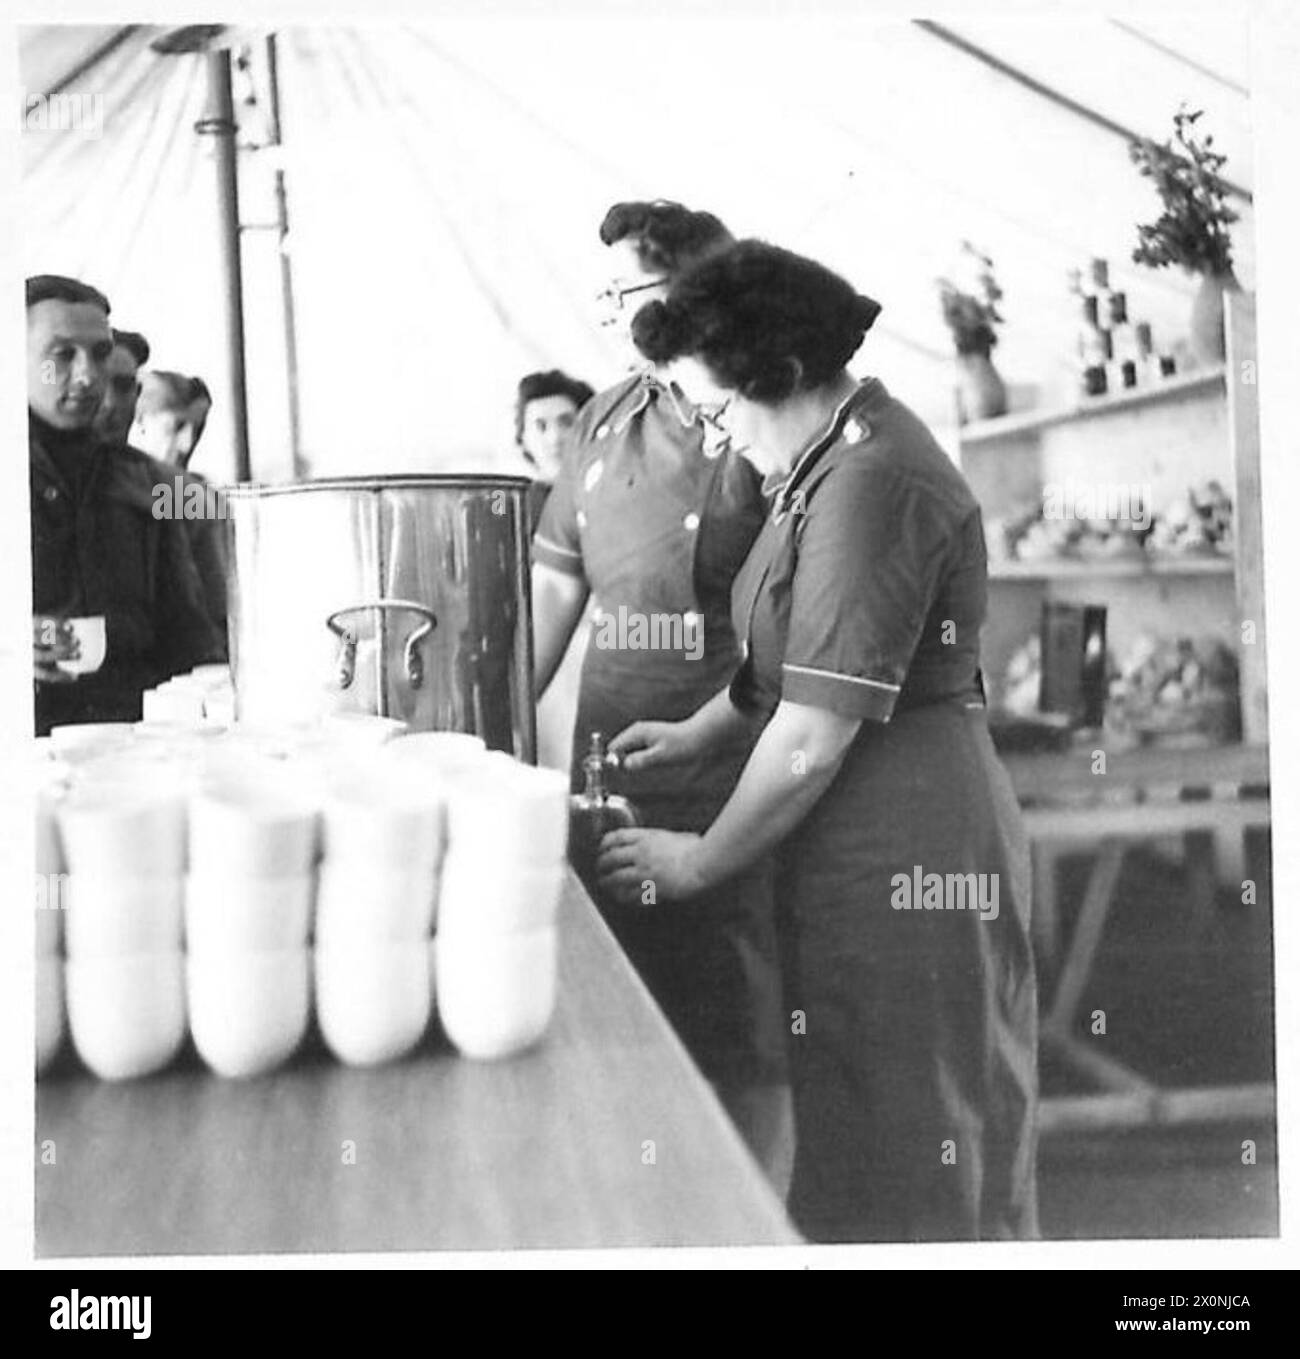 NORTH AFRICA : E.F.I. (NAAFI) SERVICES IN ALGIERS - Serving tea at the Botanical Gardens canteen are:- Miss Bessie Smith of 51 Allander Terrace, Millngrave, Glasgow, and Miss Cathie Muir, 47 York Street, Wishaw, Lanark. Photographic negative , British Army Stock Photo